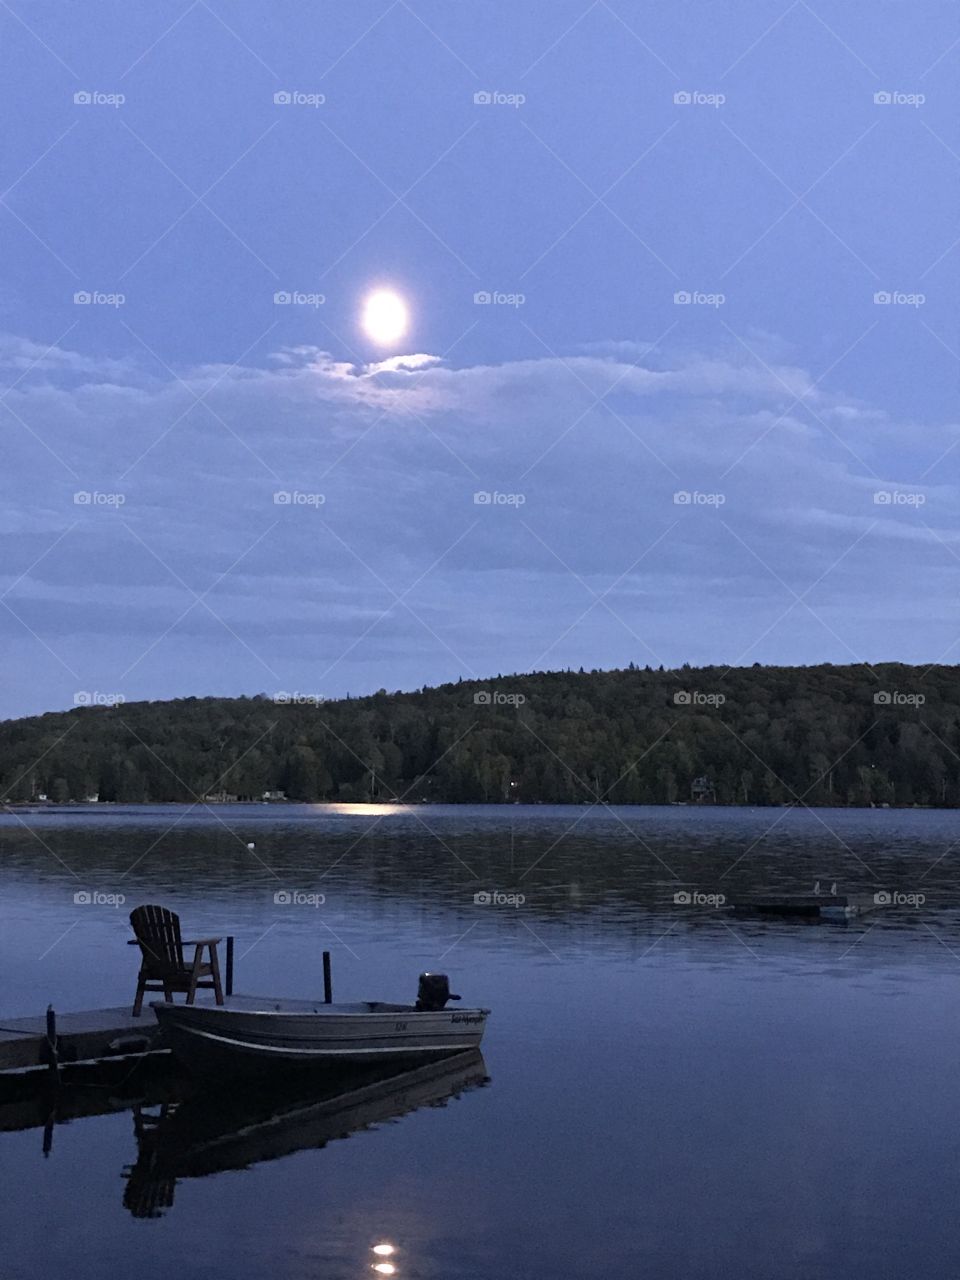 Lake side by moonlight 